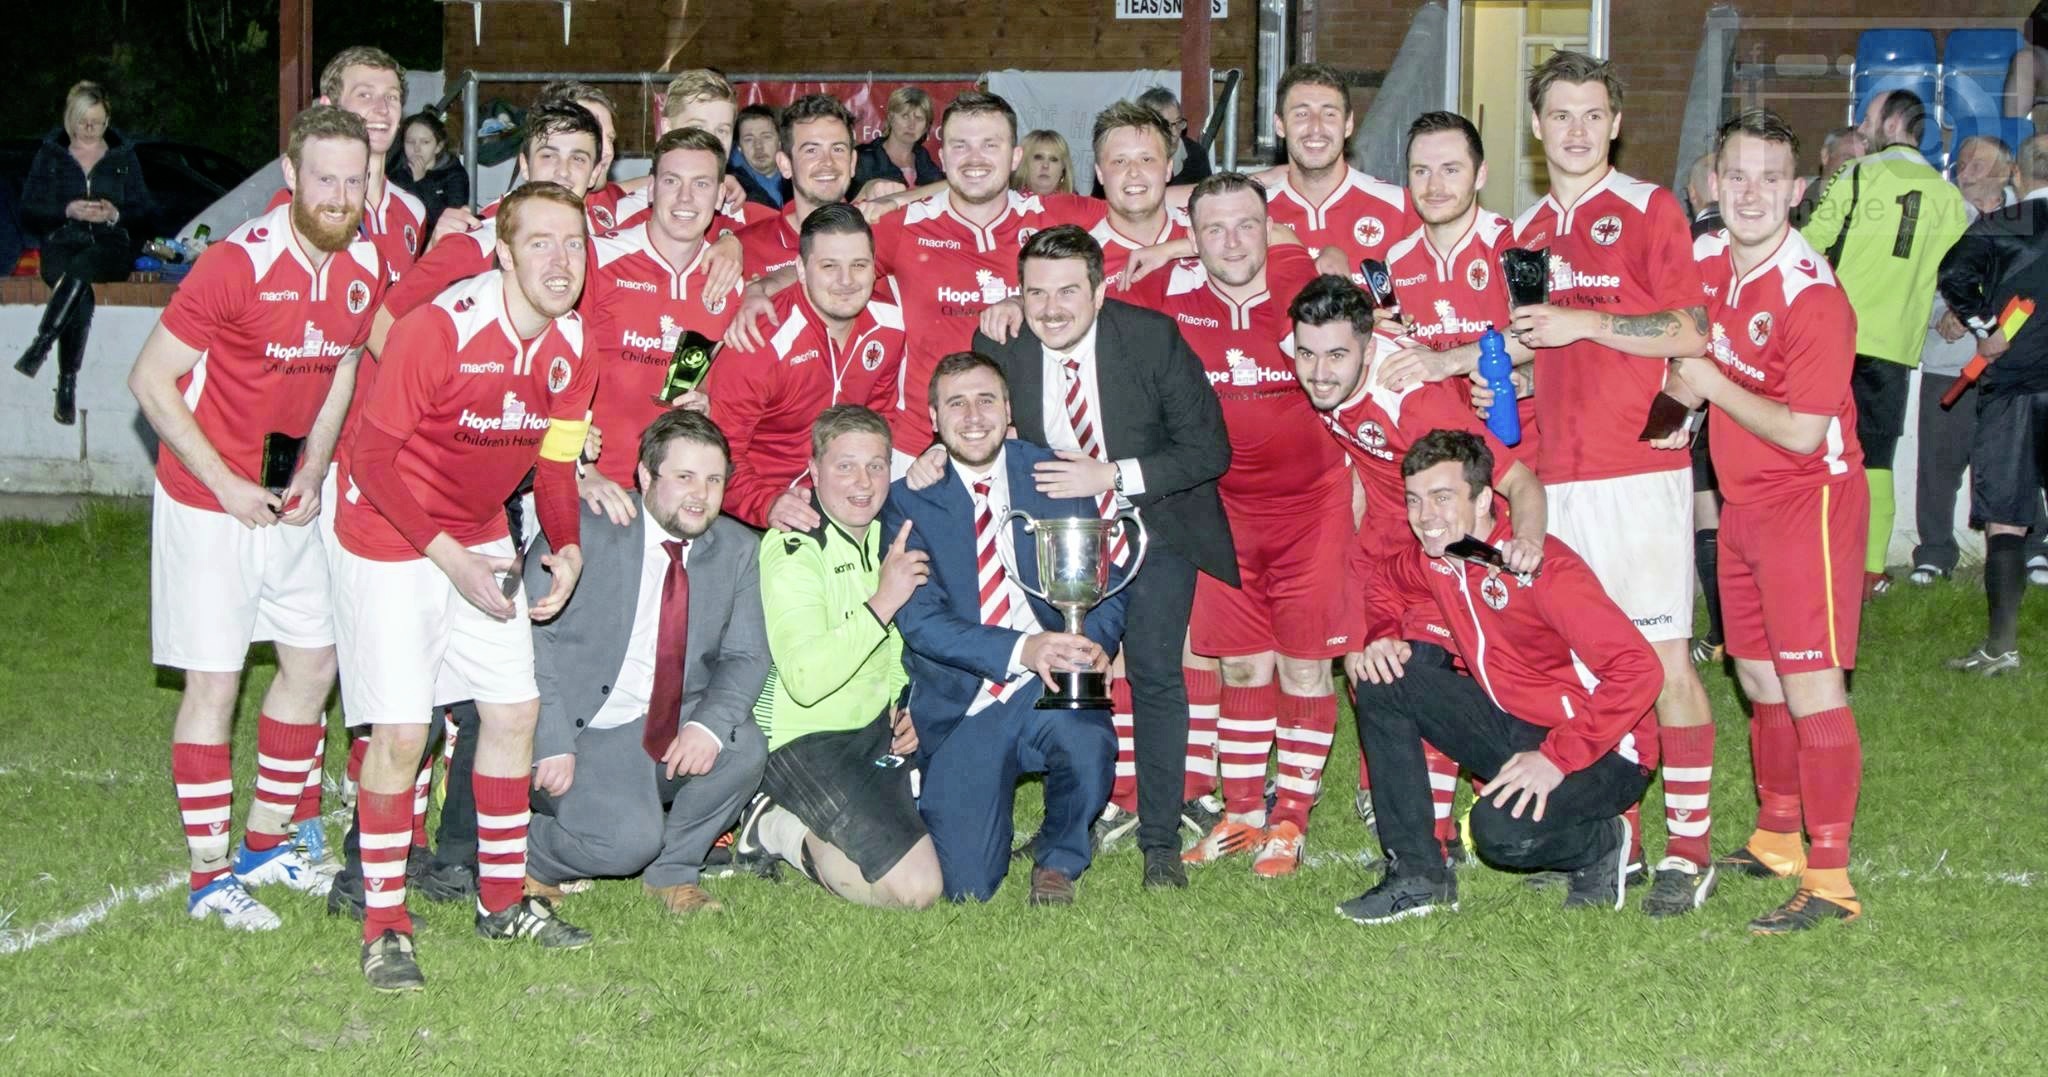 Llanymynech Football Club with the Consolation Cup in 2017.